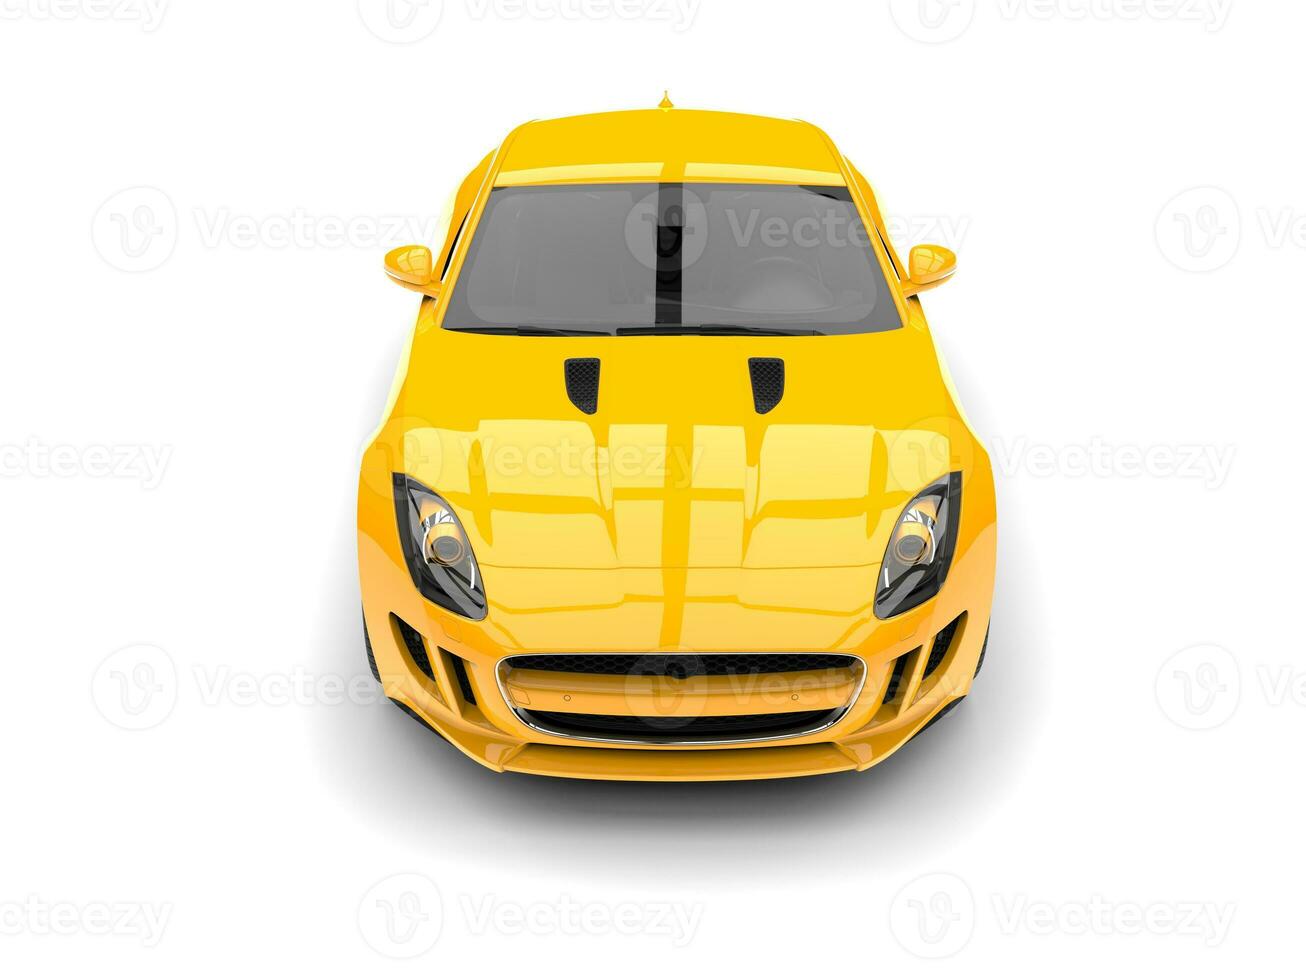 Elegant modern sports luxury car in sun yellow color - top down view photo